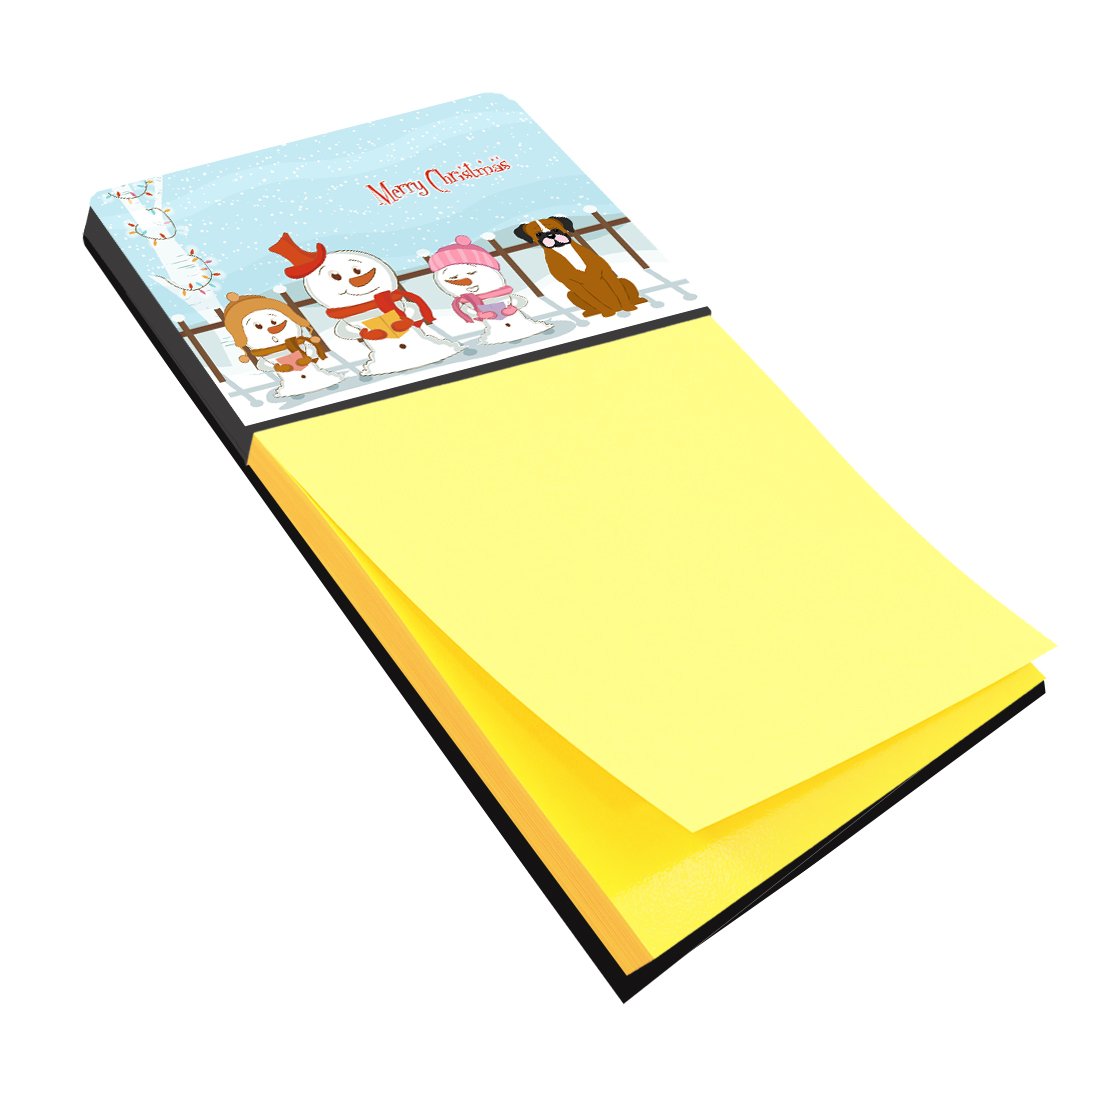 Merry Christmas Carolers Flashy Fawn Boxer Sticky Note Holder BB2447SN by Caroline's Treasures